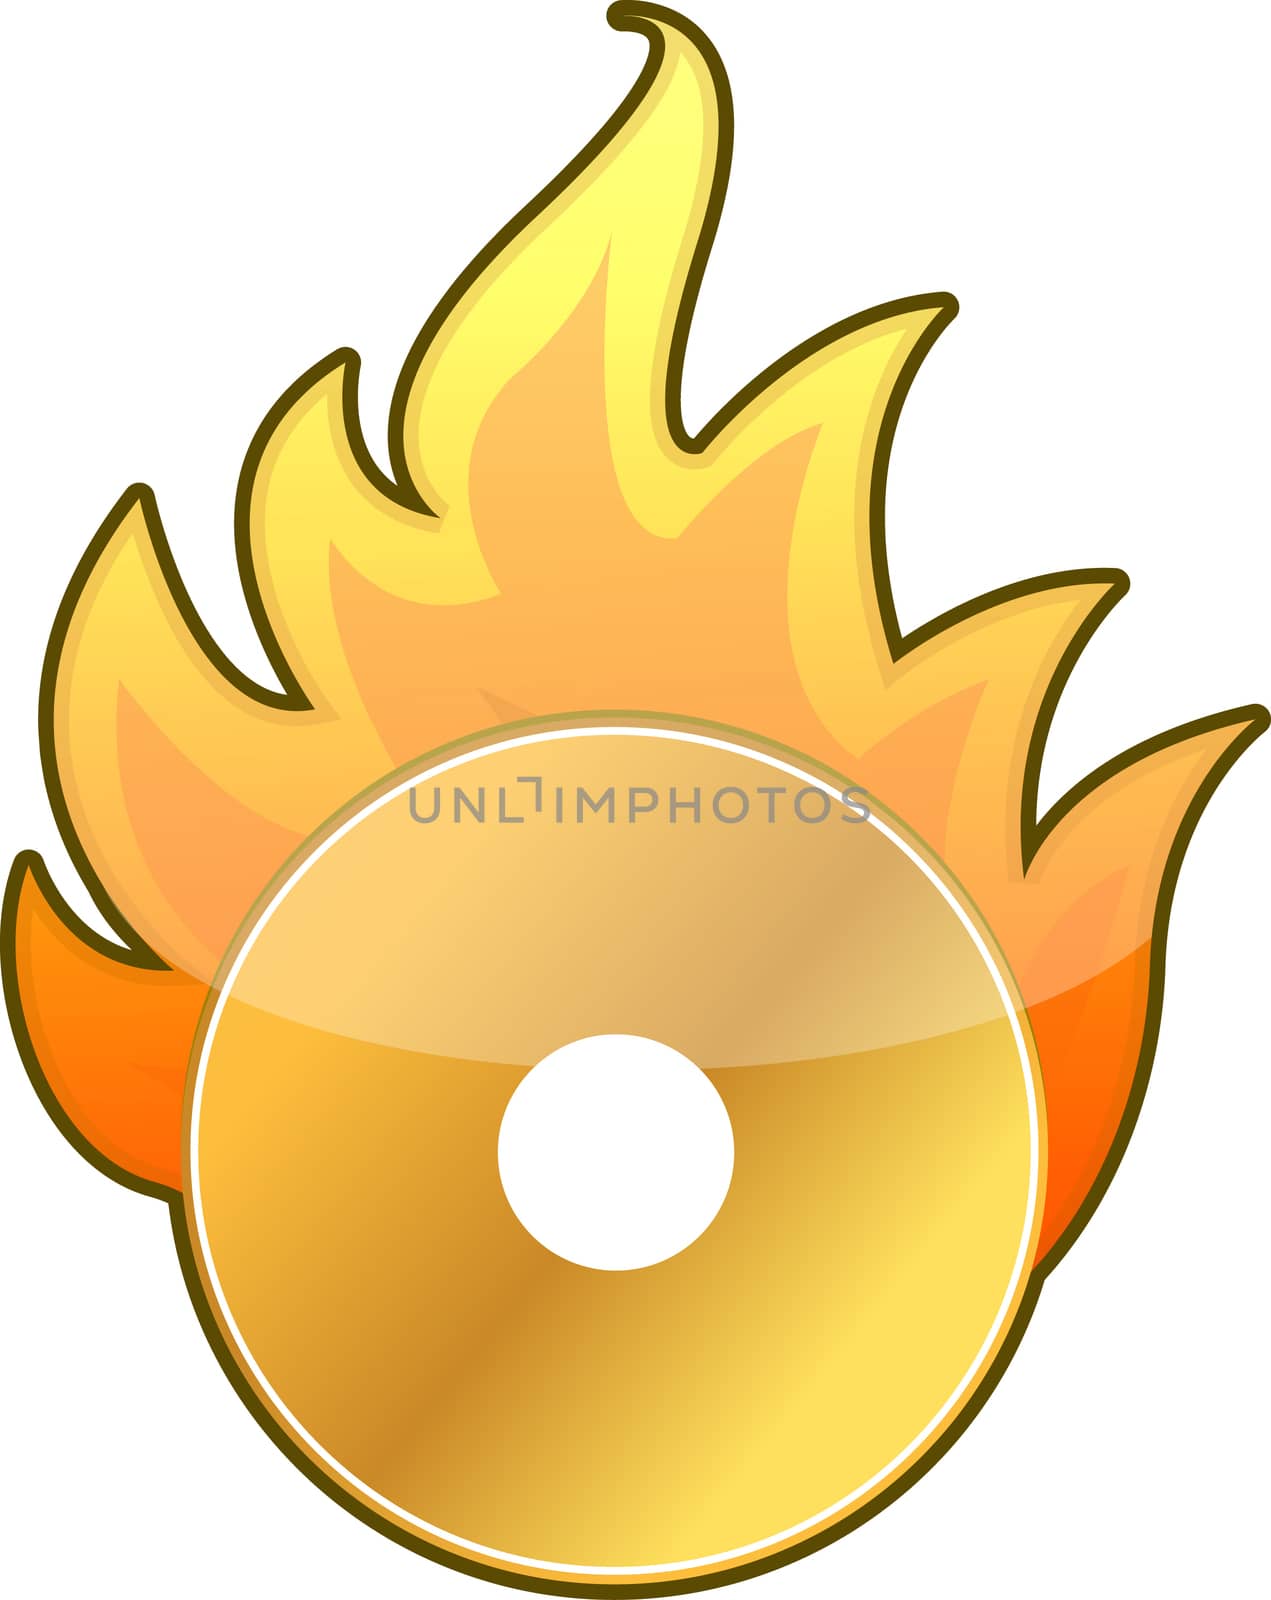 Burning CD DVD icon over a white background by alexmillos